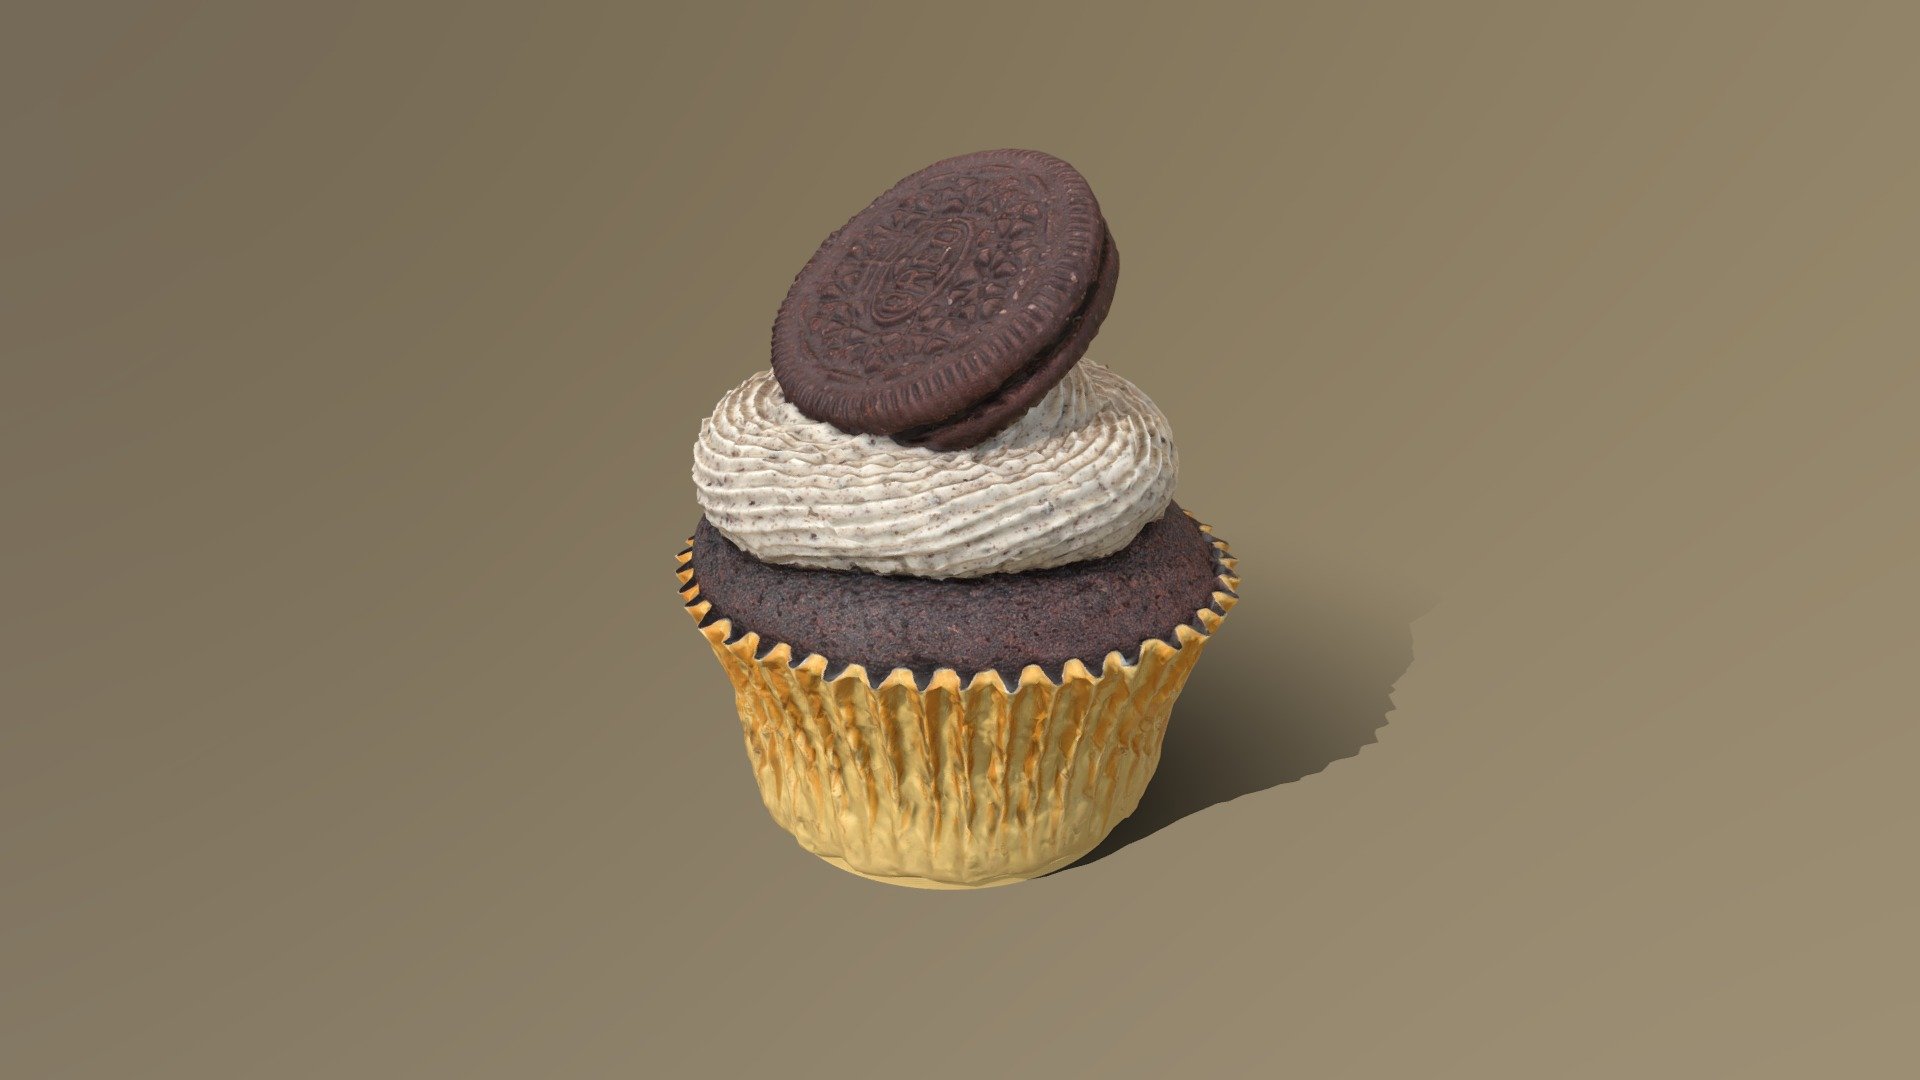 This Oreo Cookie Cupcake model was created using photogrammetry which is made by CAKESBURG Premium Cake Shop in the UK. You can purchase real cake from this link: https://cakesburg.co.uk/products/premium-oreo-cupcake-box?_pos=2&amp;_sid=b26dc3d45&amp;_ss=r

Textures 4096*4096px PBR photoscan-based materials Base Color, Normal, Roughness, Specular) - Oreo Cookie Cupcake - Buy Royalty Free 3D model by Cakesburg Premium 3D Cake Shop (@Viscom_Cakesburg) 3d model